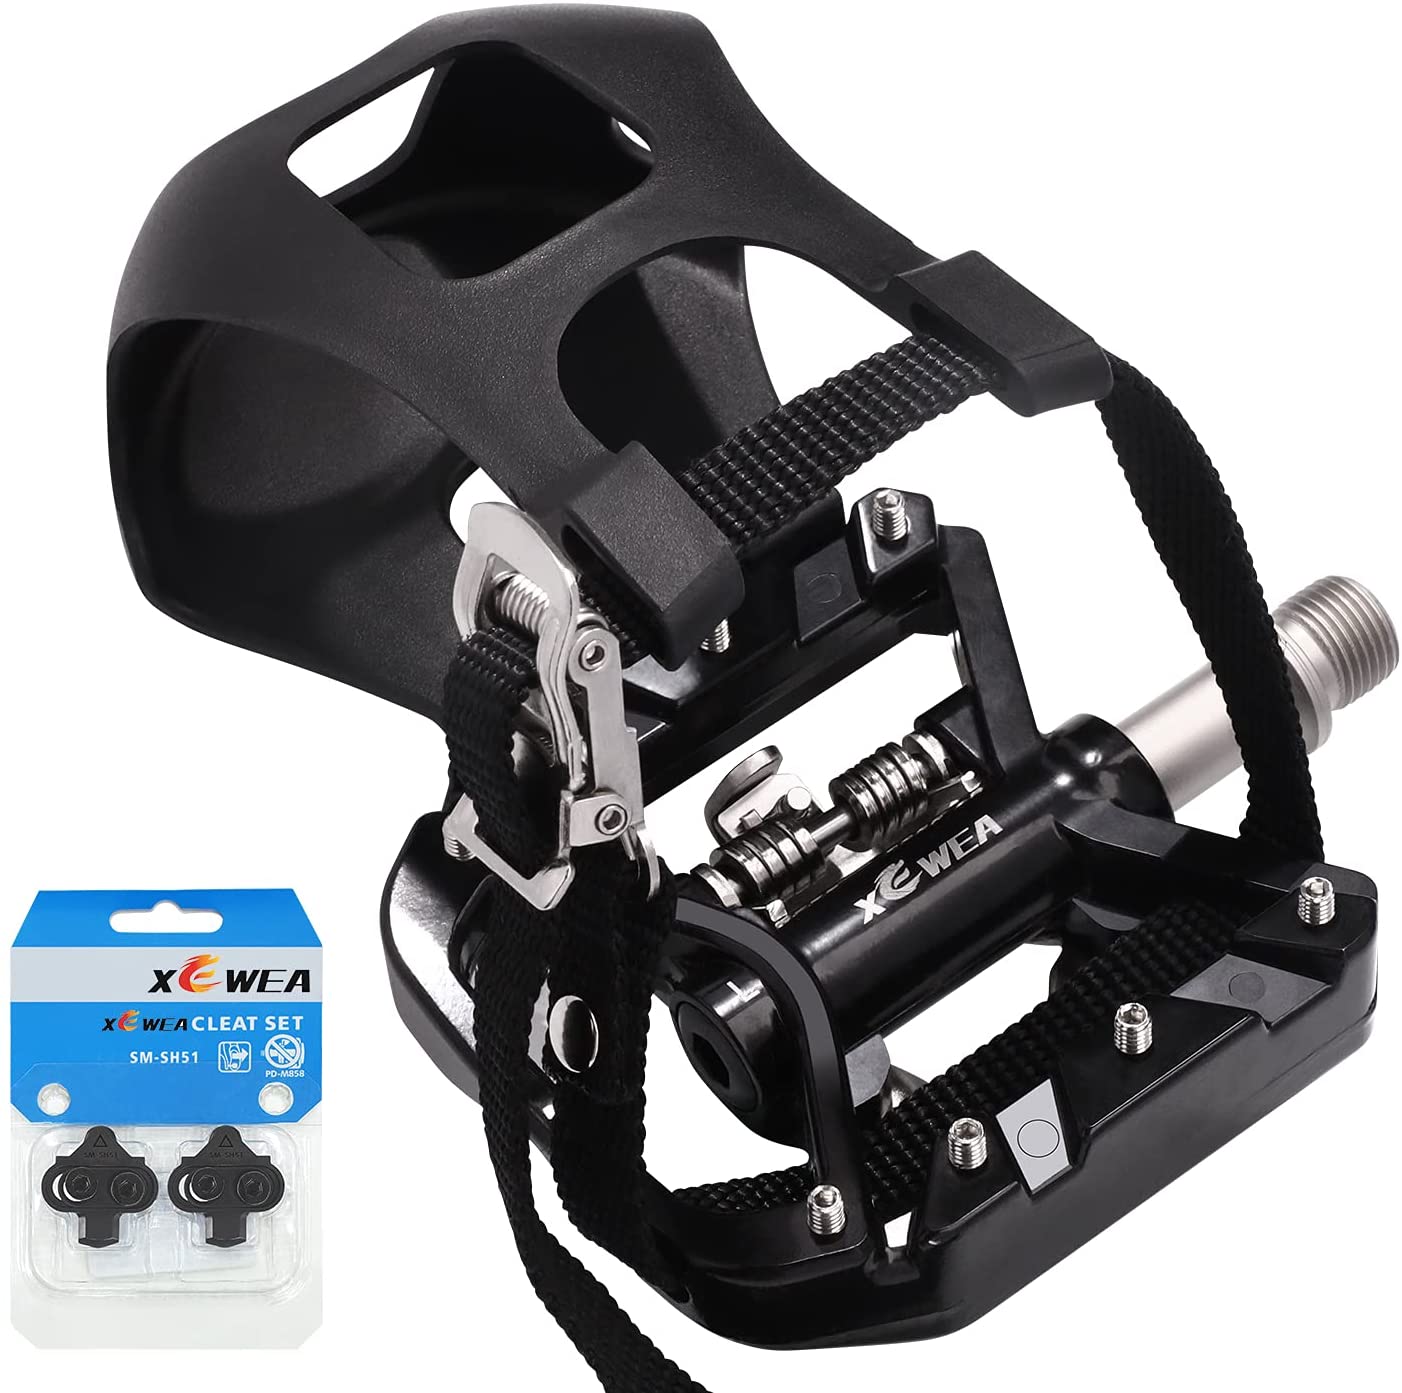 Different riders prefer different types of mountain bike pedals and a dual pedal like this allows the rider to use toe clips and clipless pedals.